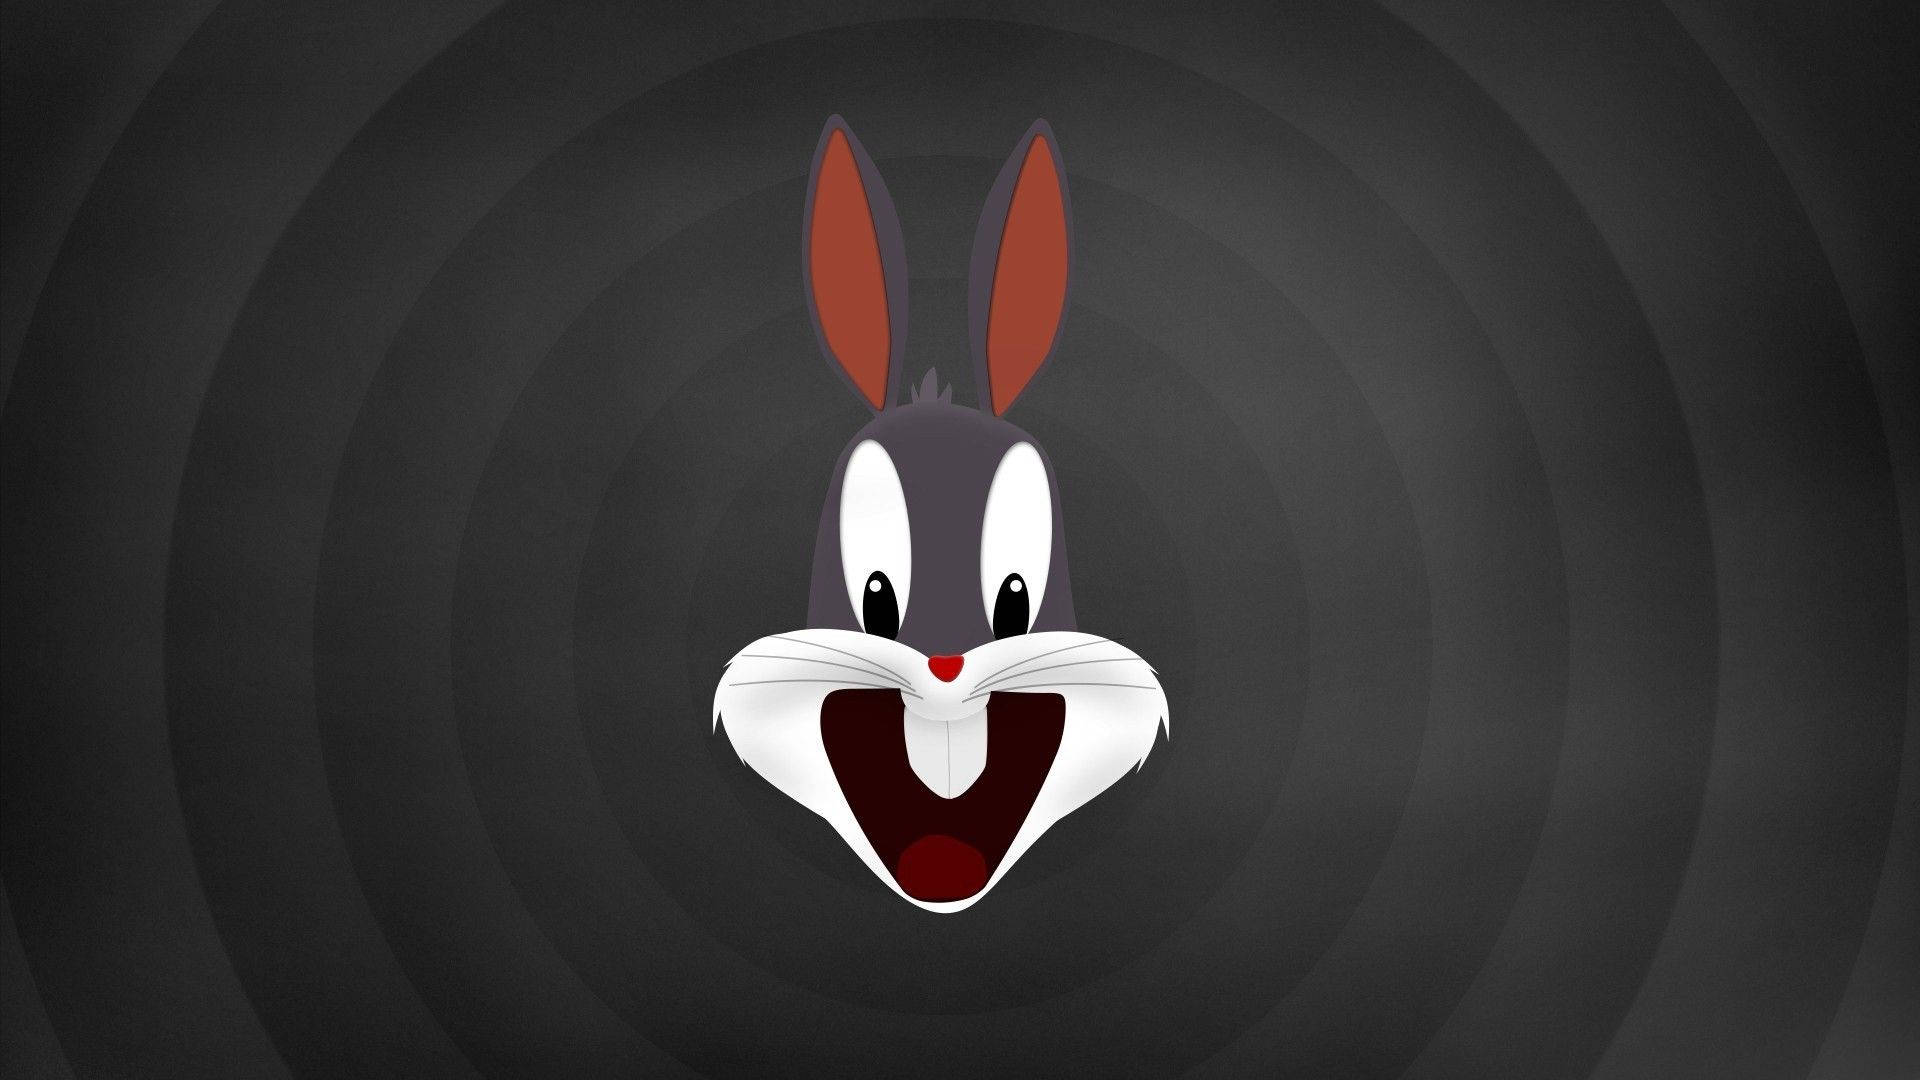 Free Bugs Bunny Wallpaper Downloads, Bugs Bunny Wallpaper for FREE